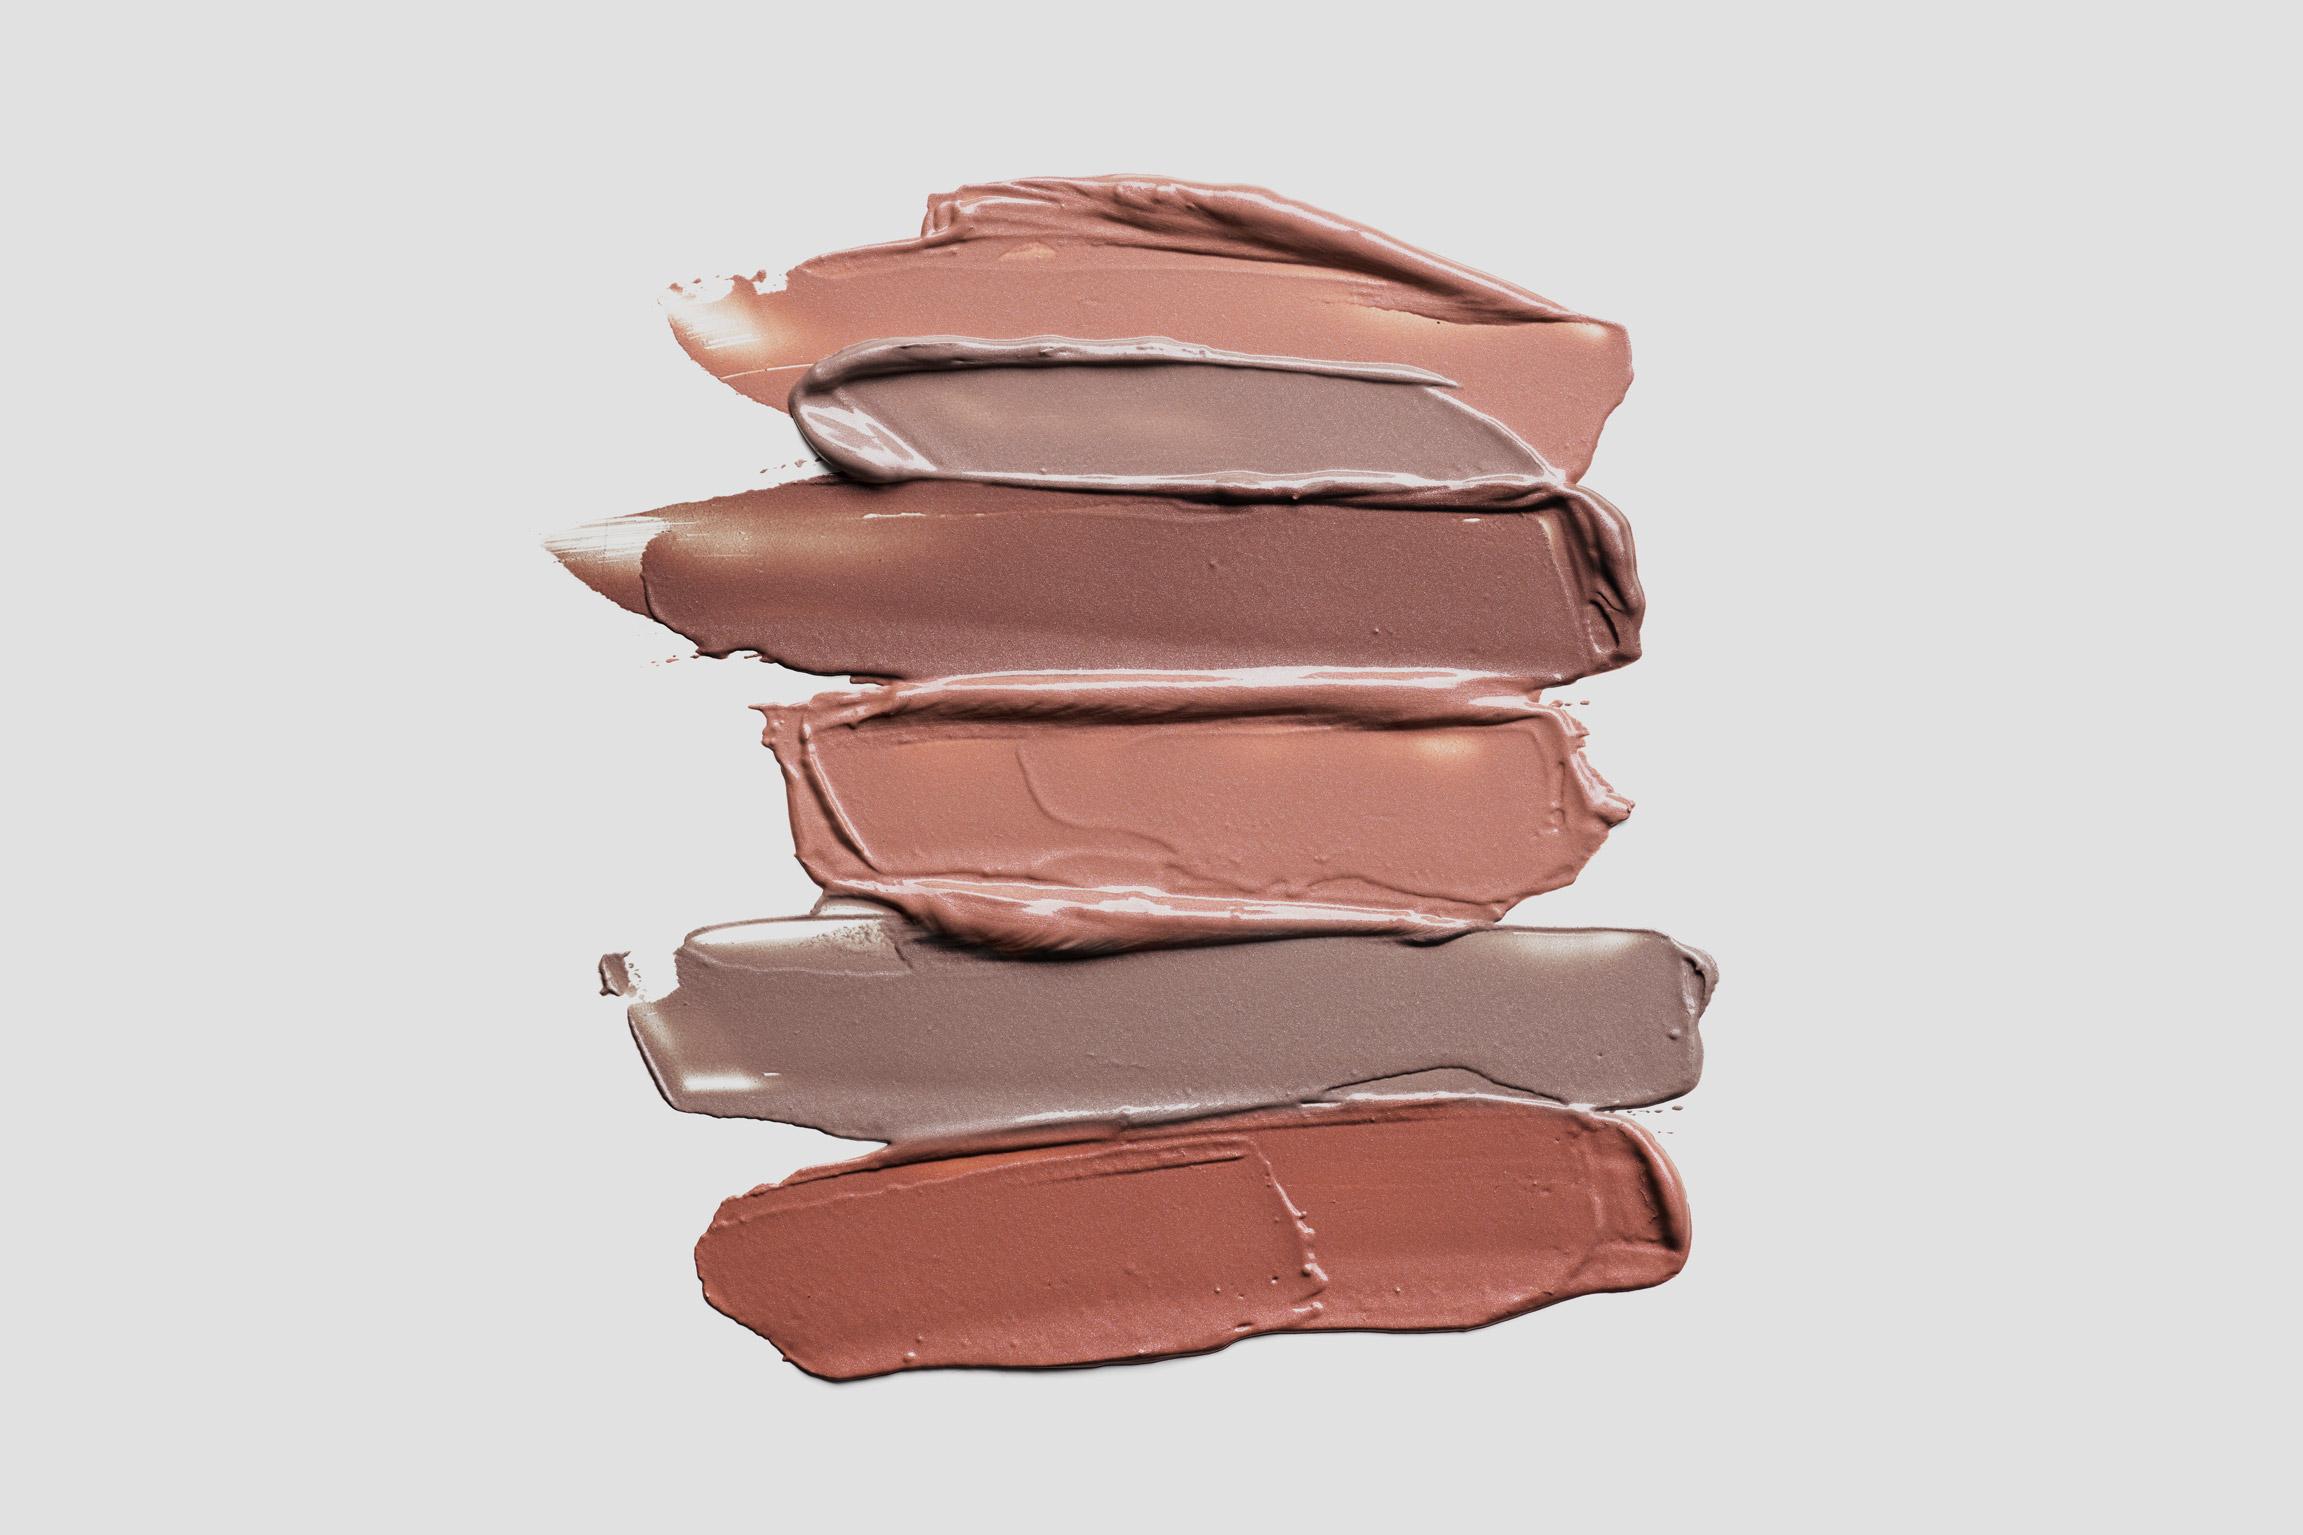 How to Find the Right Foundation Shade